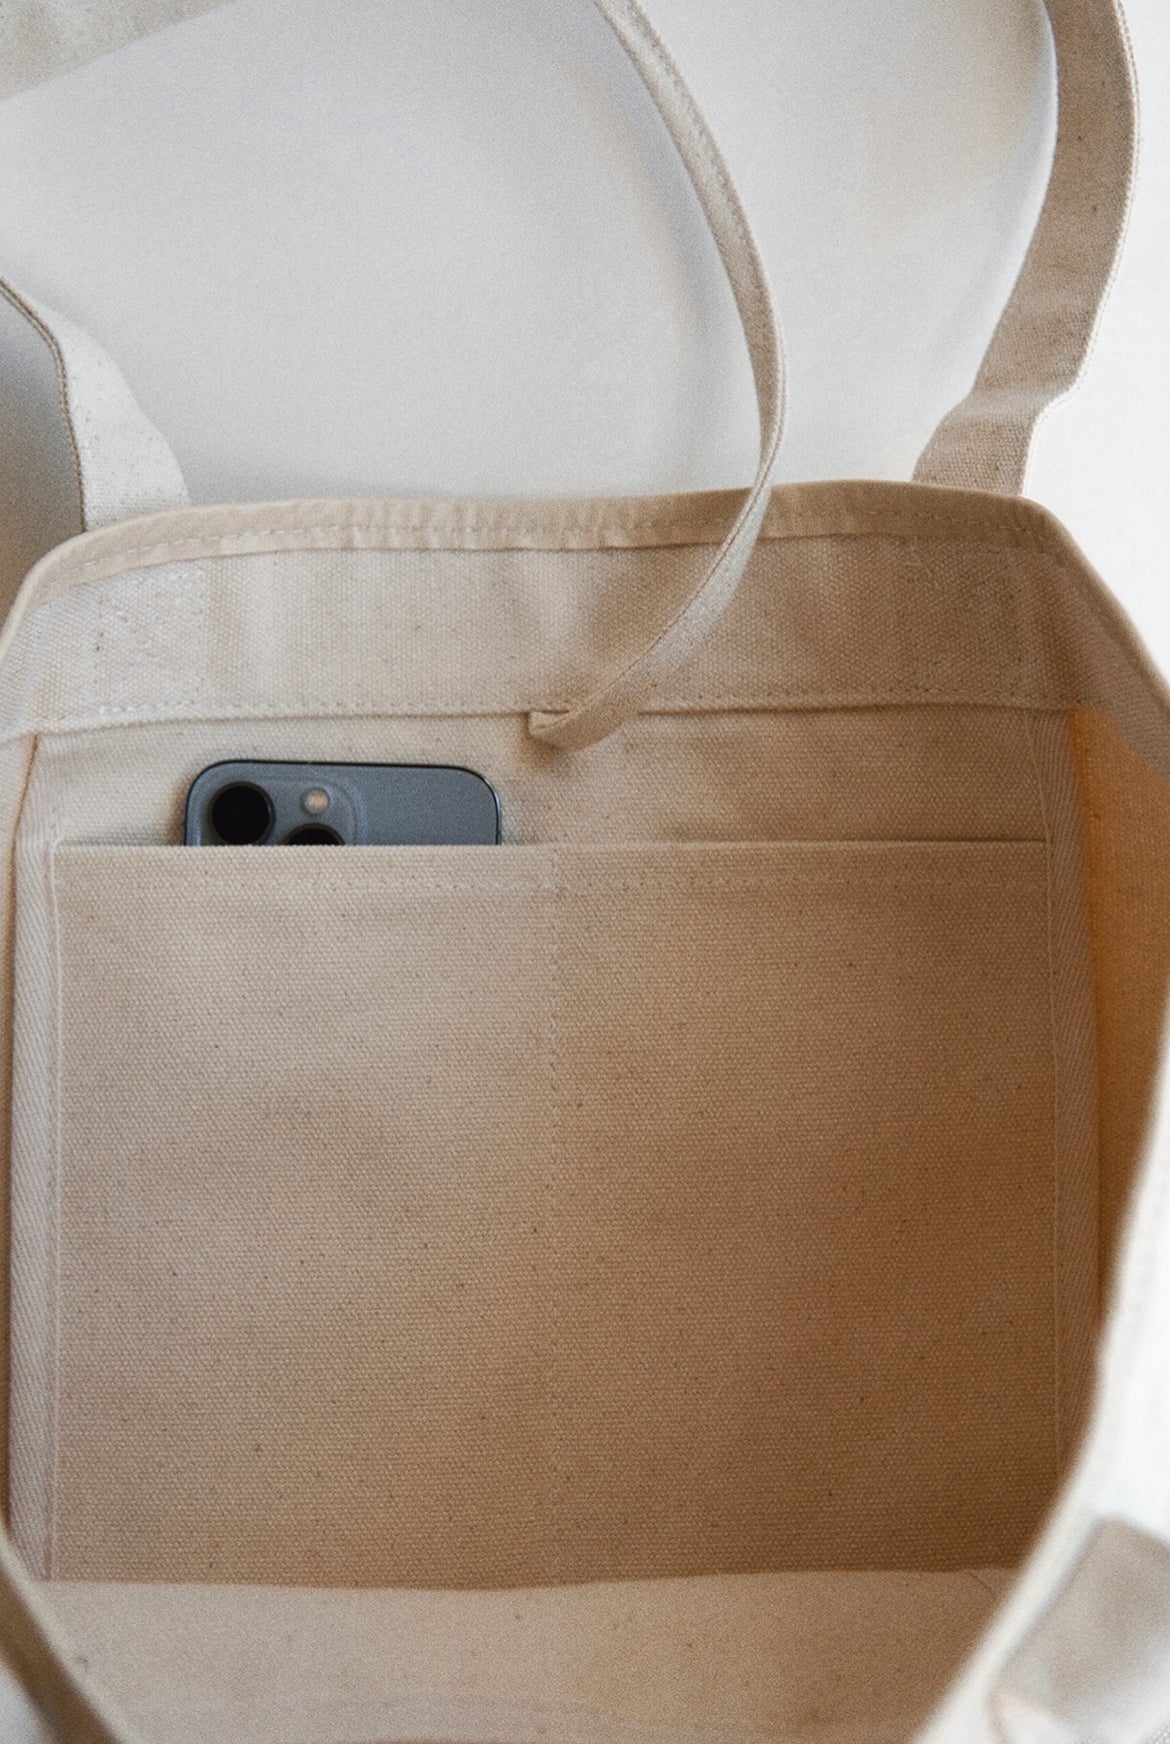 Canvas tote bag with inside pocket